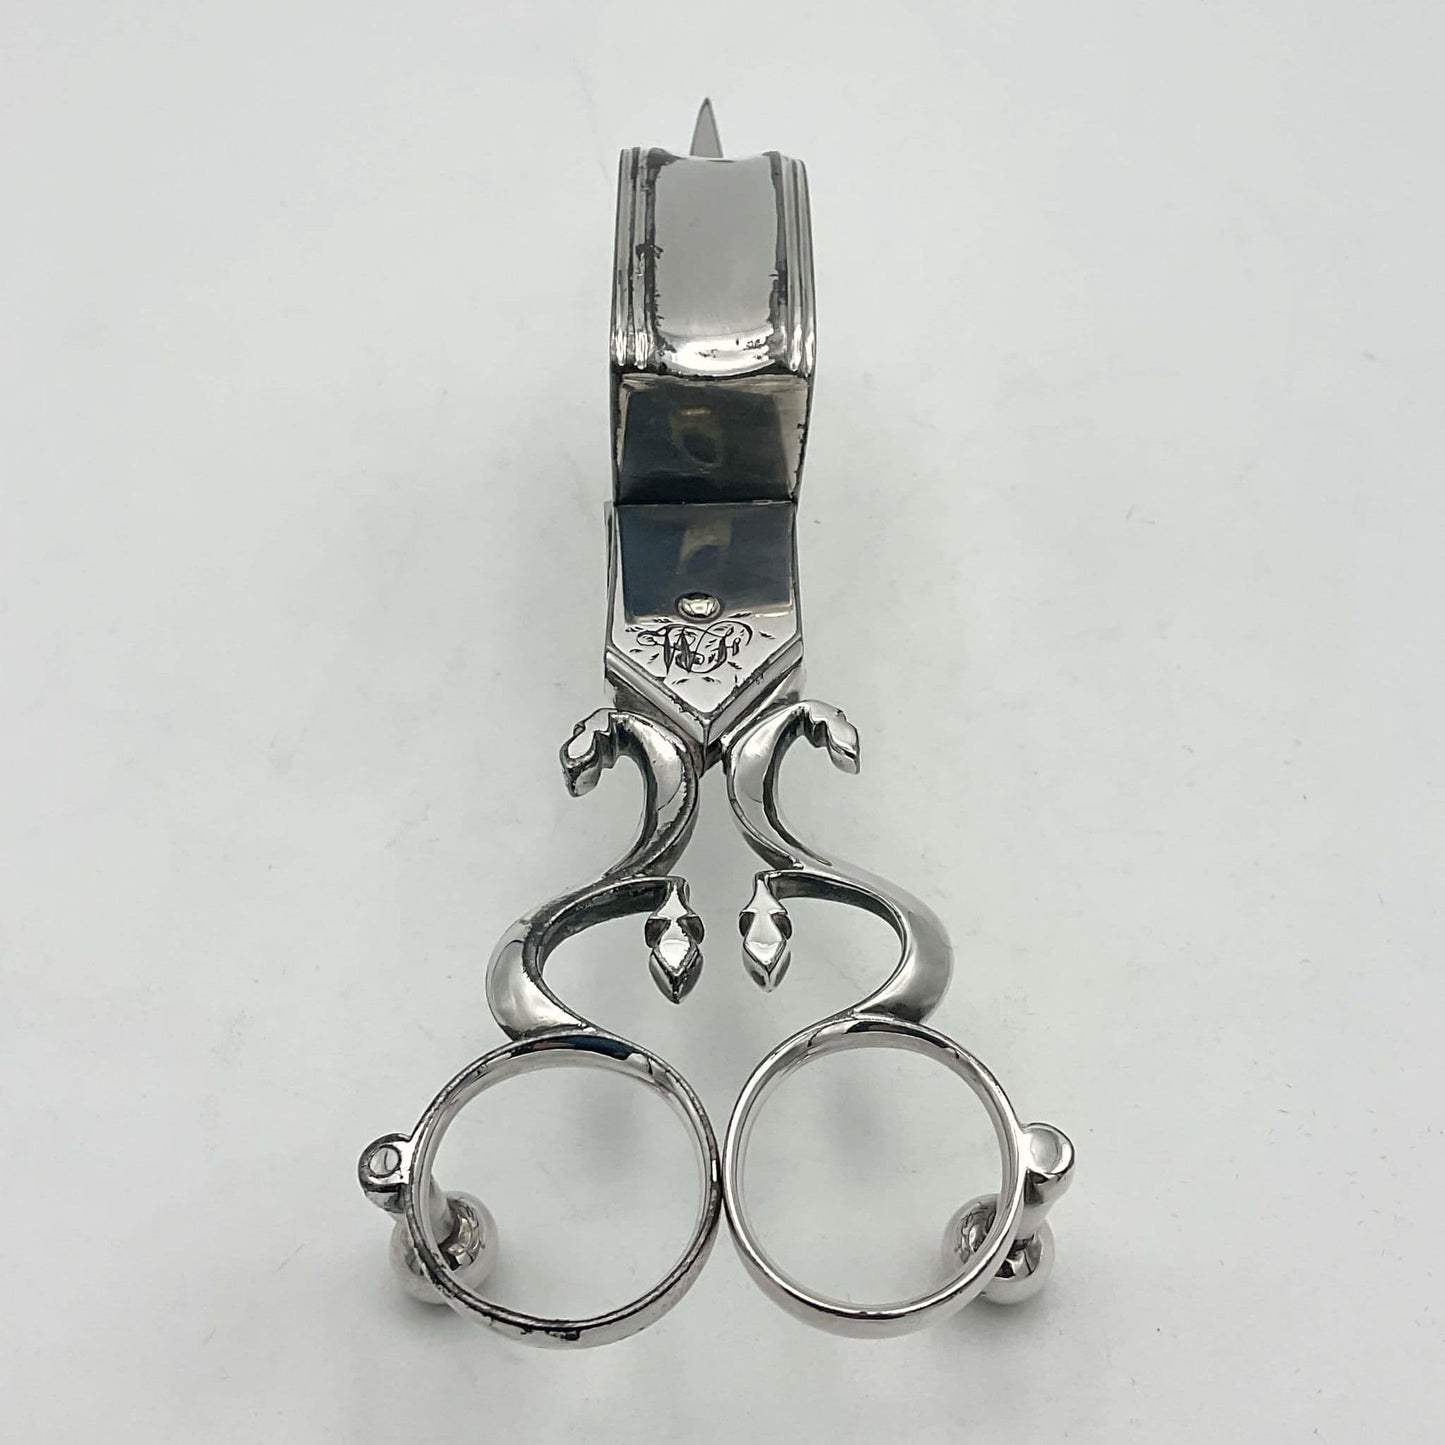 Antique 1848 Silver Plated Candle Snuffing Scissors